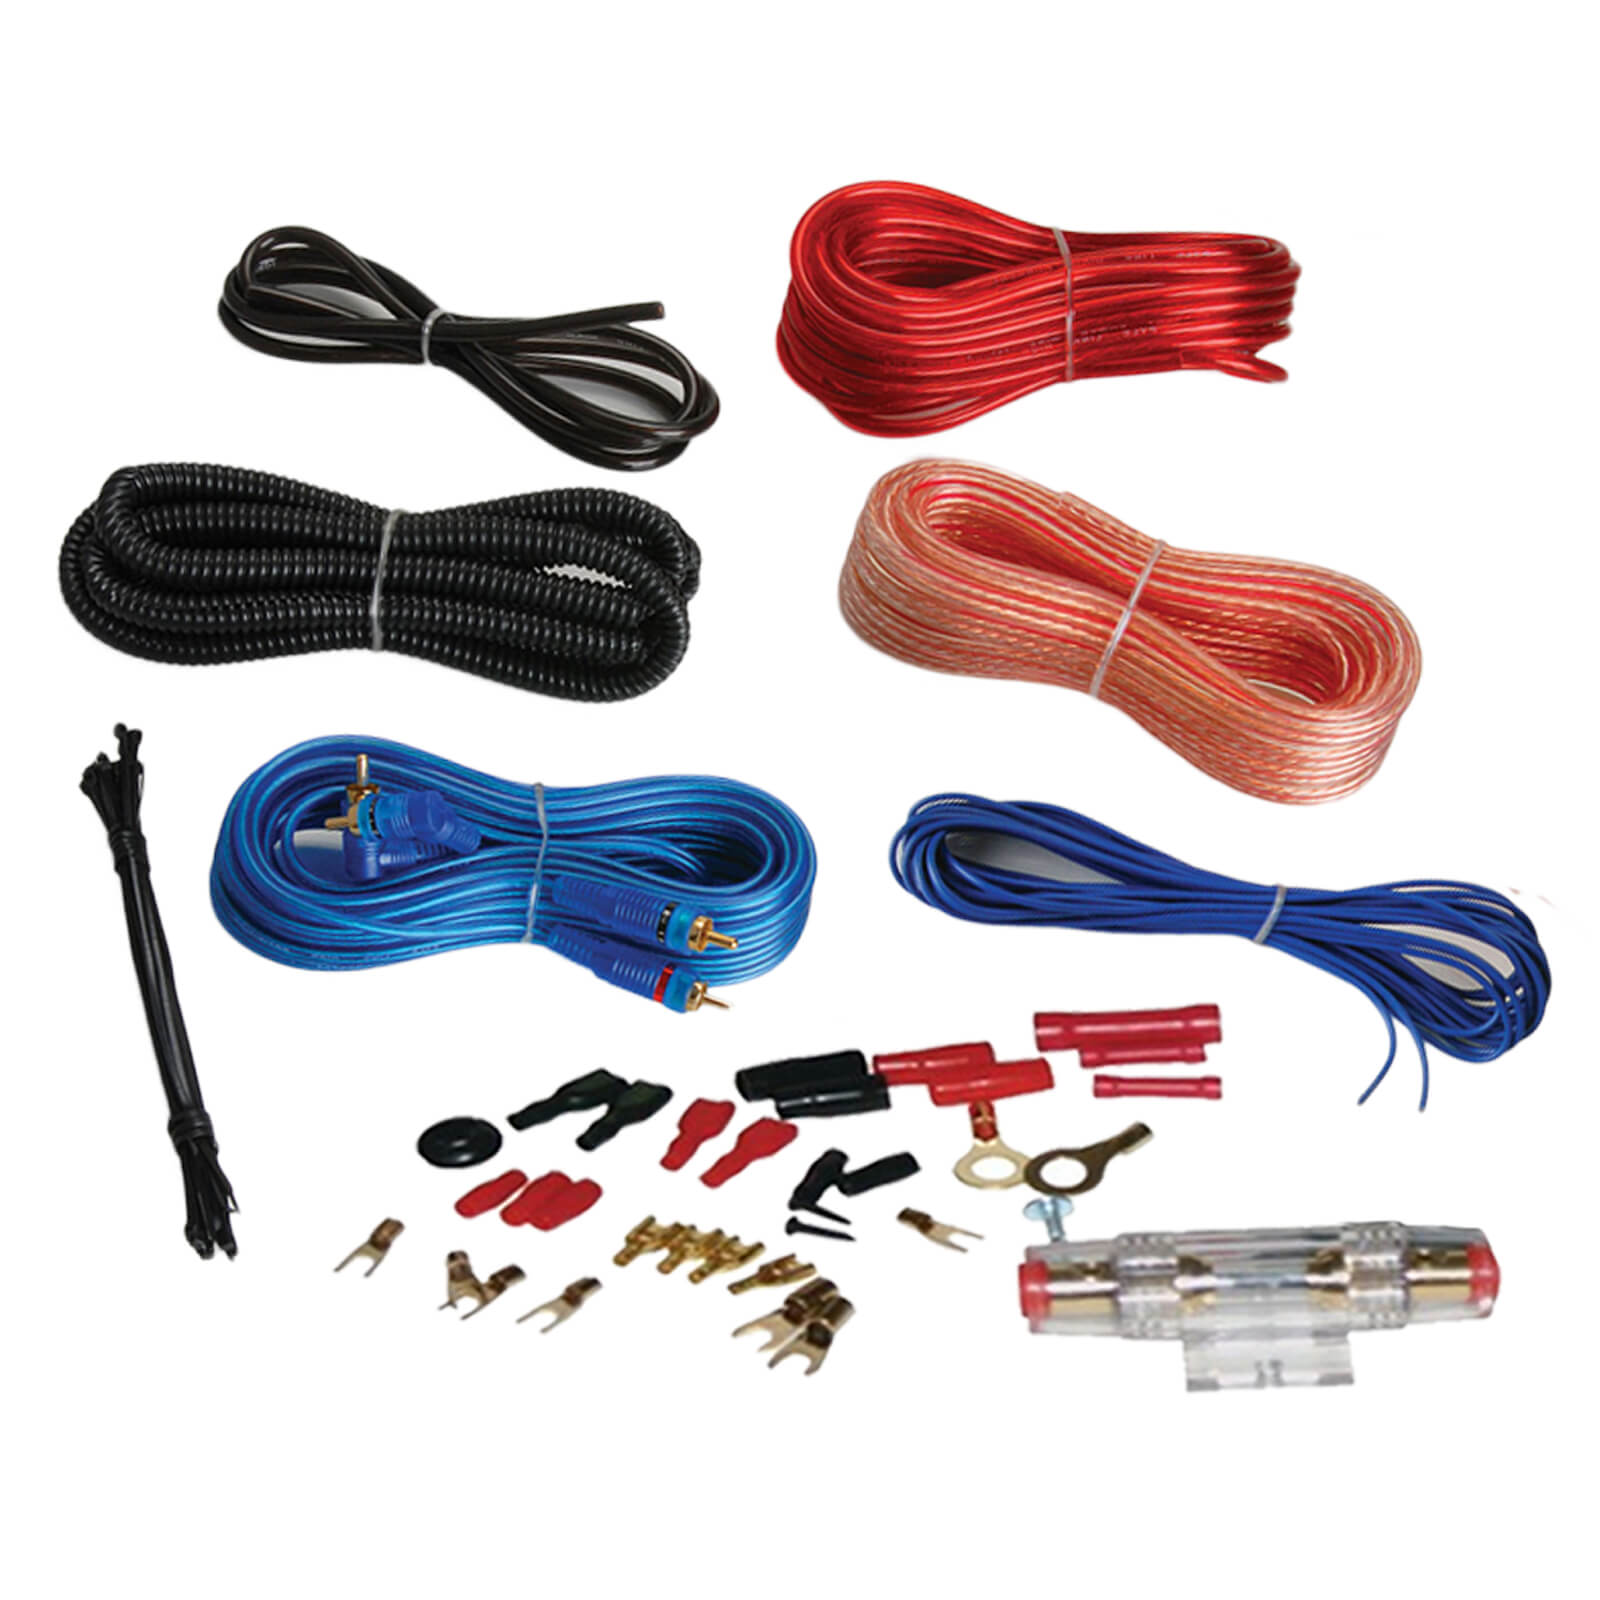 Pyle Amp / Receiver, 4X 6.5'' Speakers, Amp, Amp Install Kit, 18G 50FT Wire, Antenna